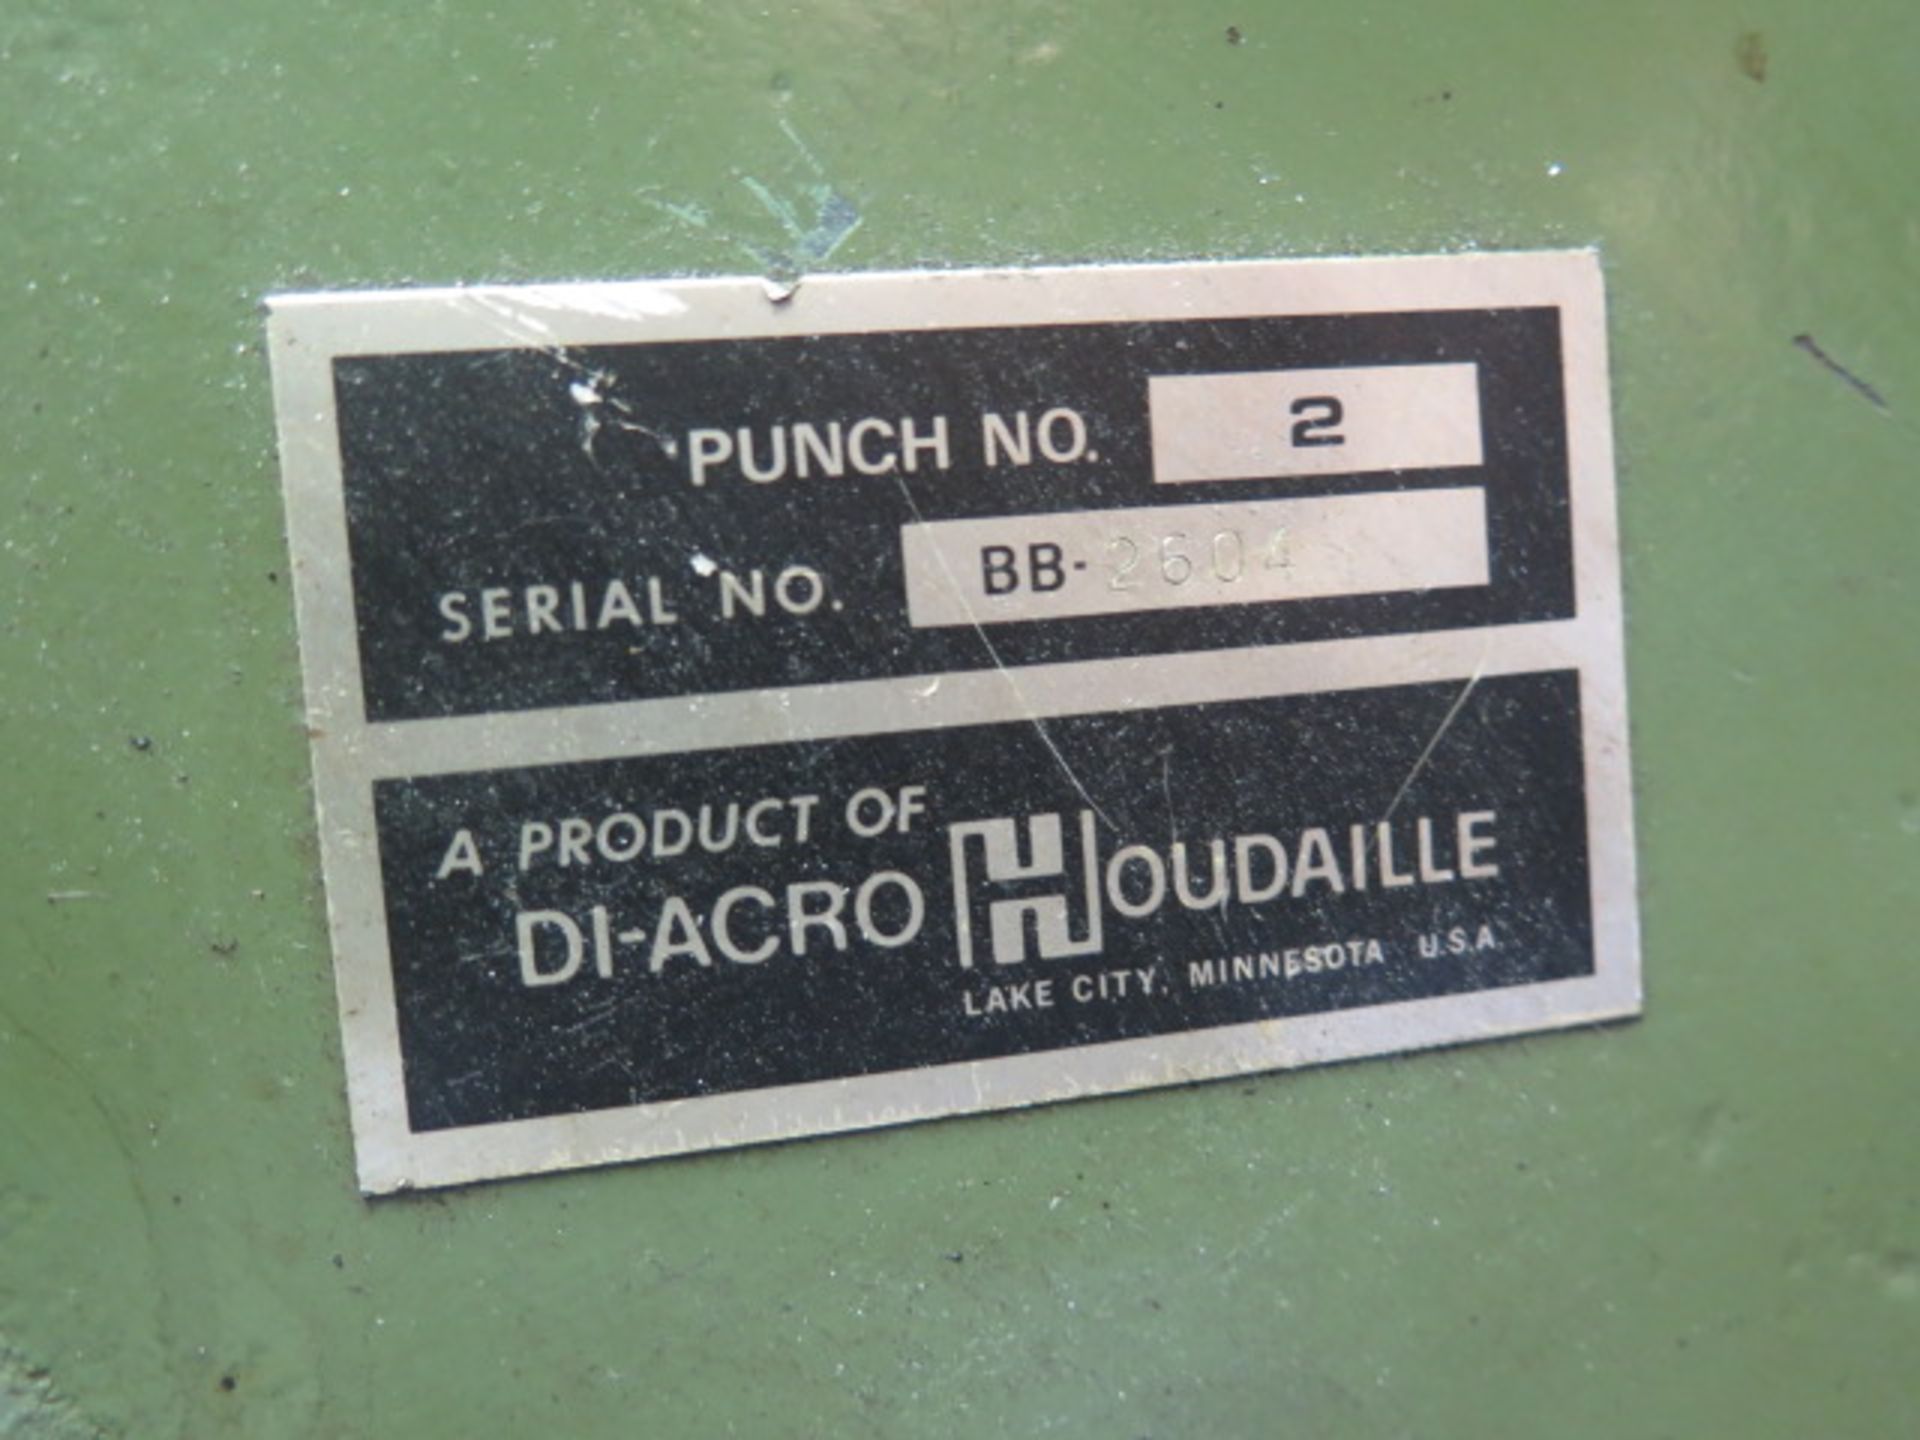 DiAcro “Punch No. 2” 12” Hand Punch s/n BB-2604 w/ Corner Notching Die (SOLD AS-IS - NO WARRANTY) - Image 7 of 7